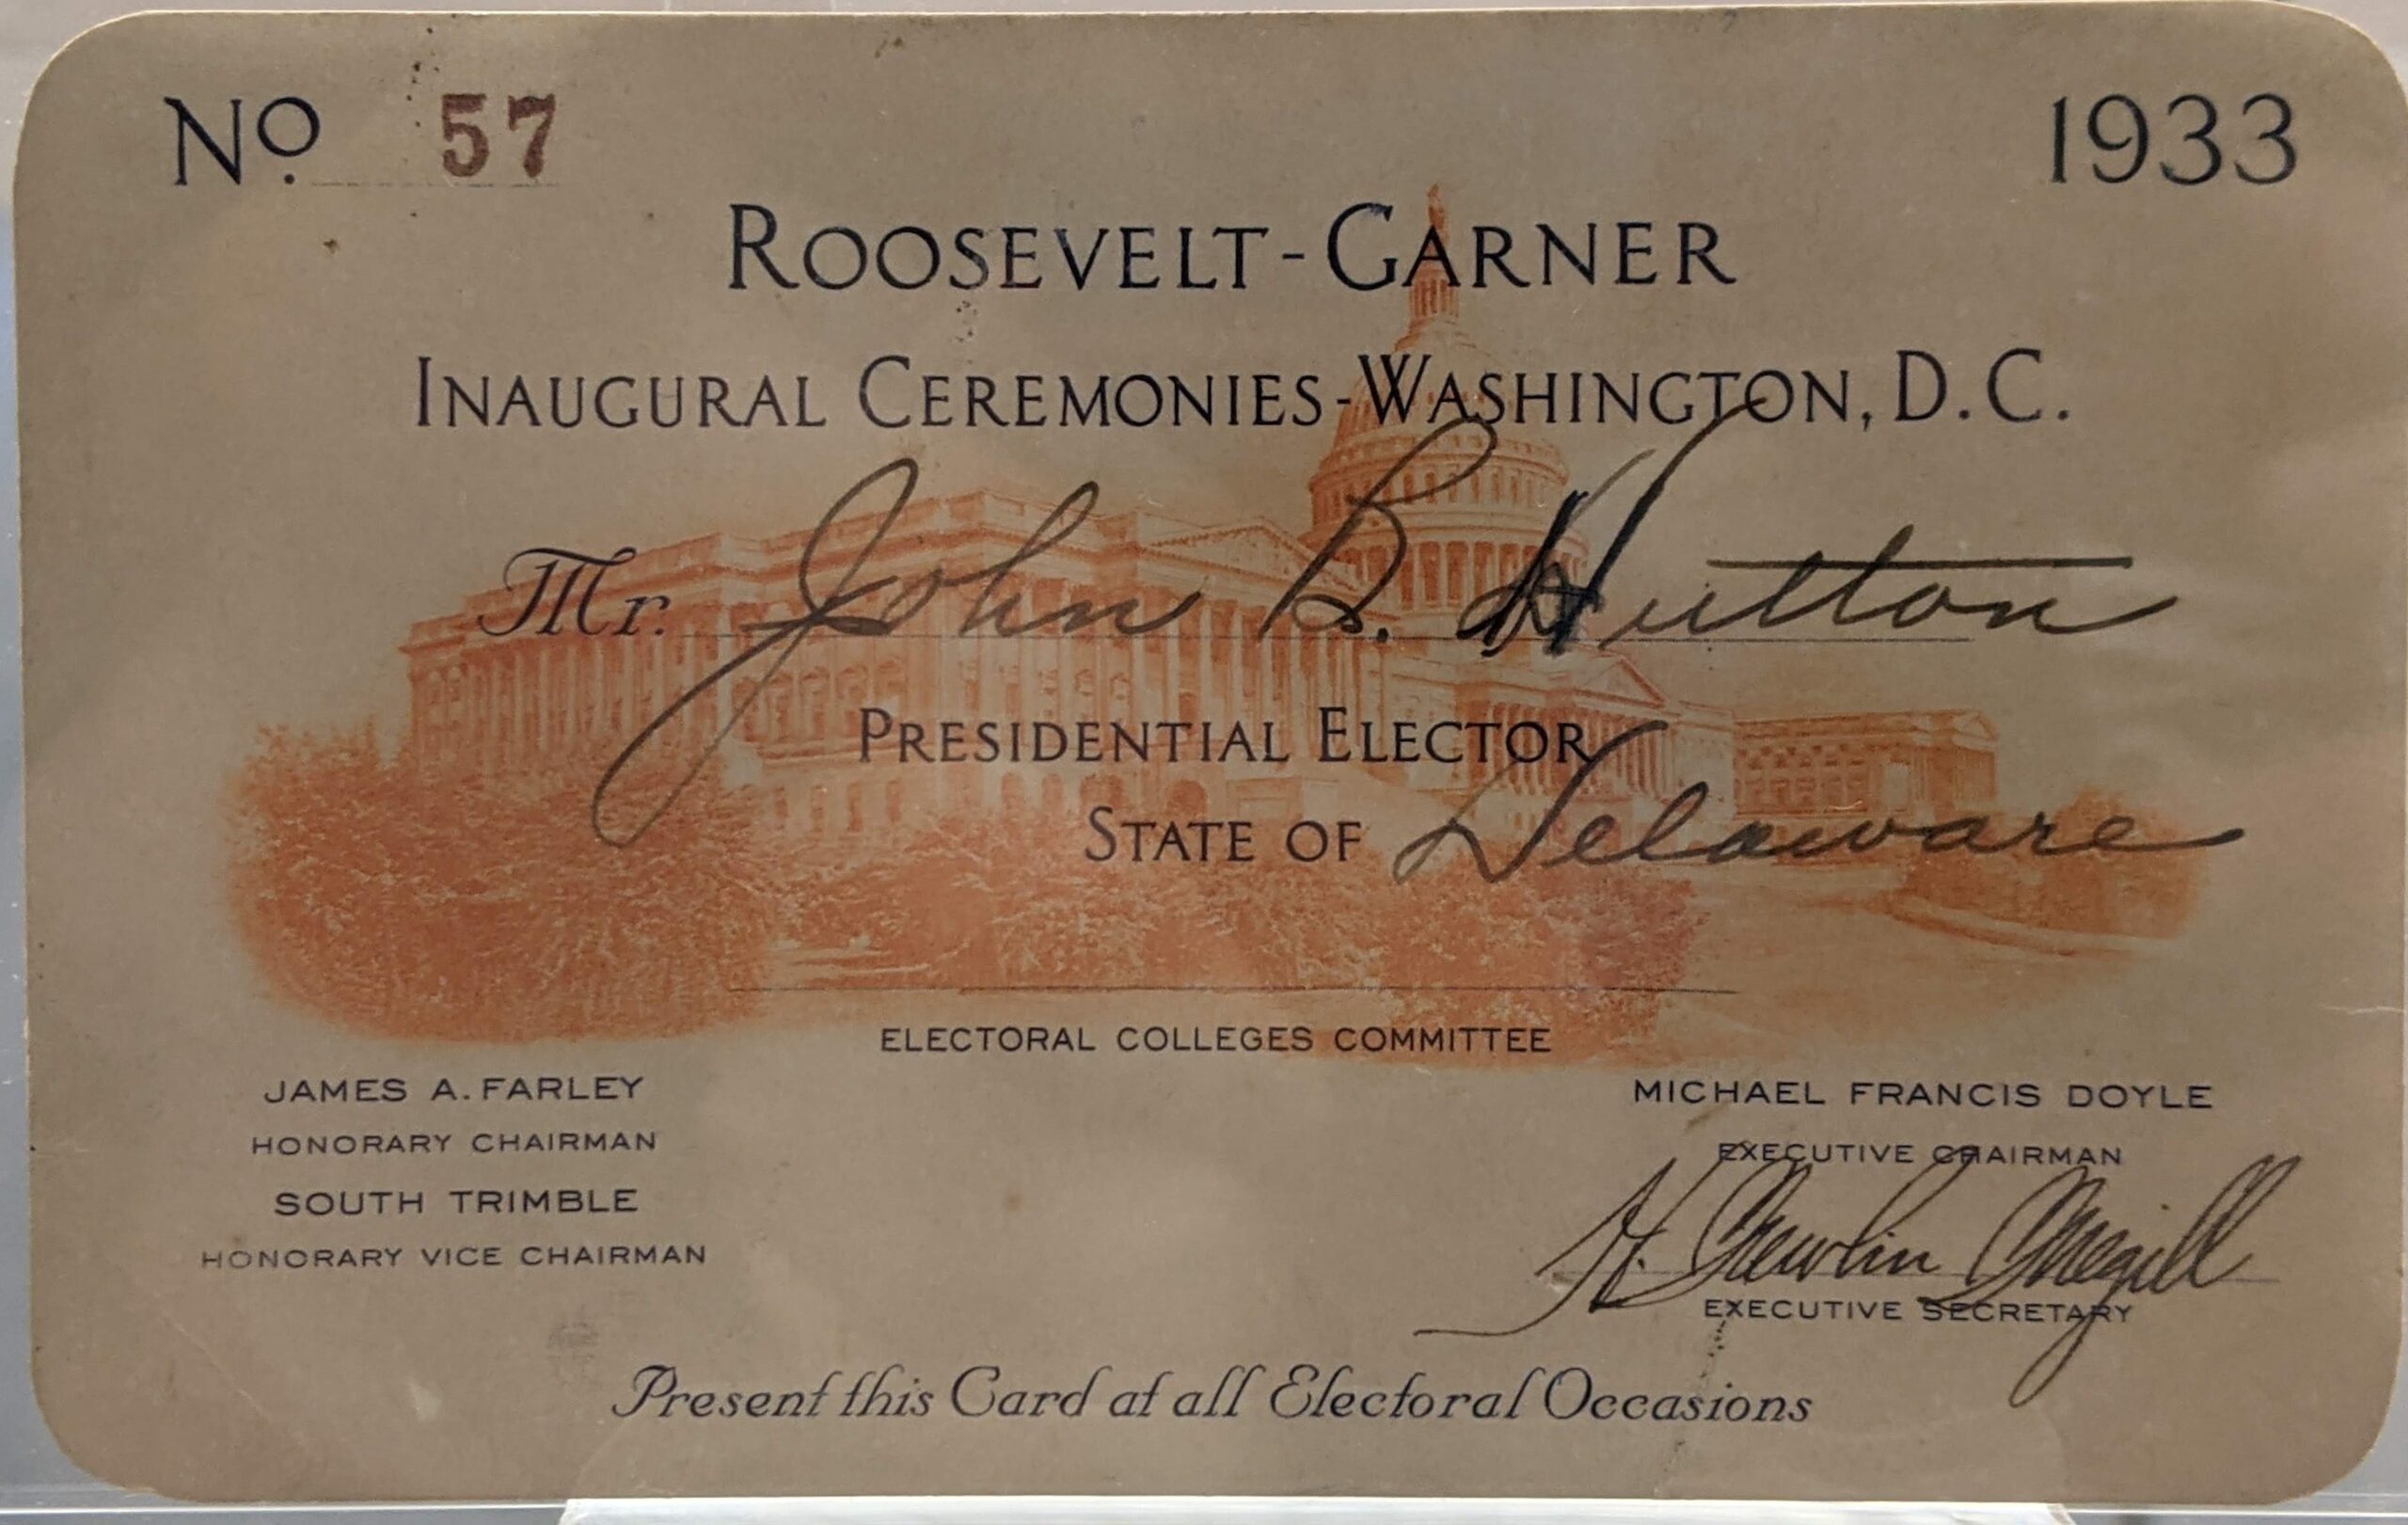 Ticket for John B. Hutton, Presidential Elector from the state of Delaware, to the Roosevelt-Garner Inaugural Ceremonies, March 1933